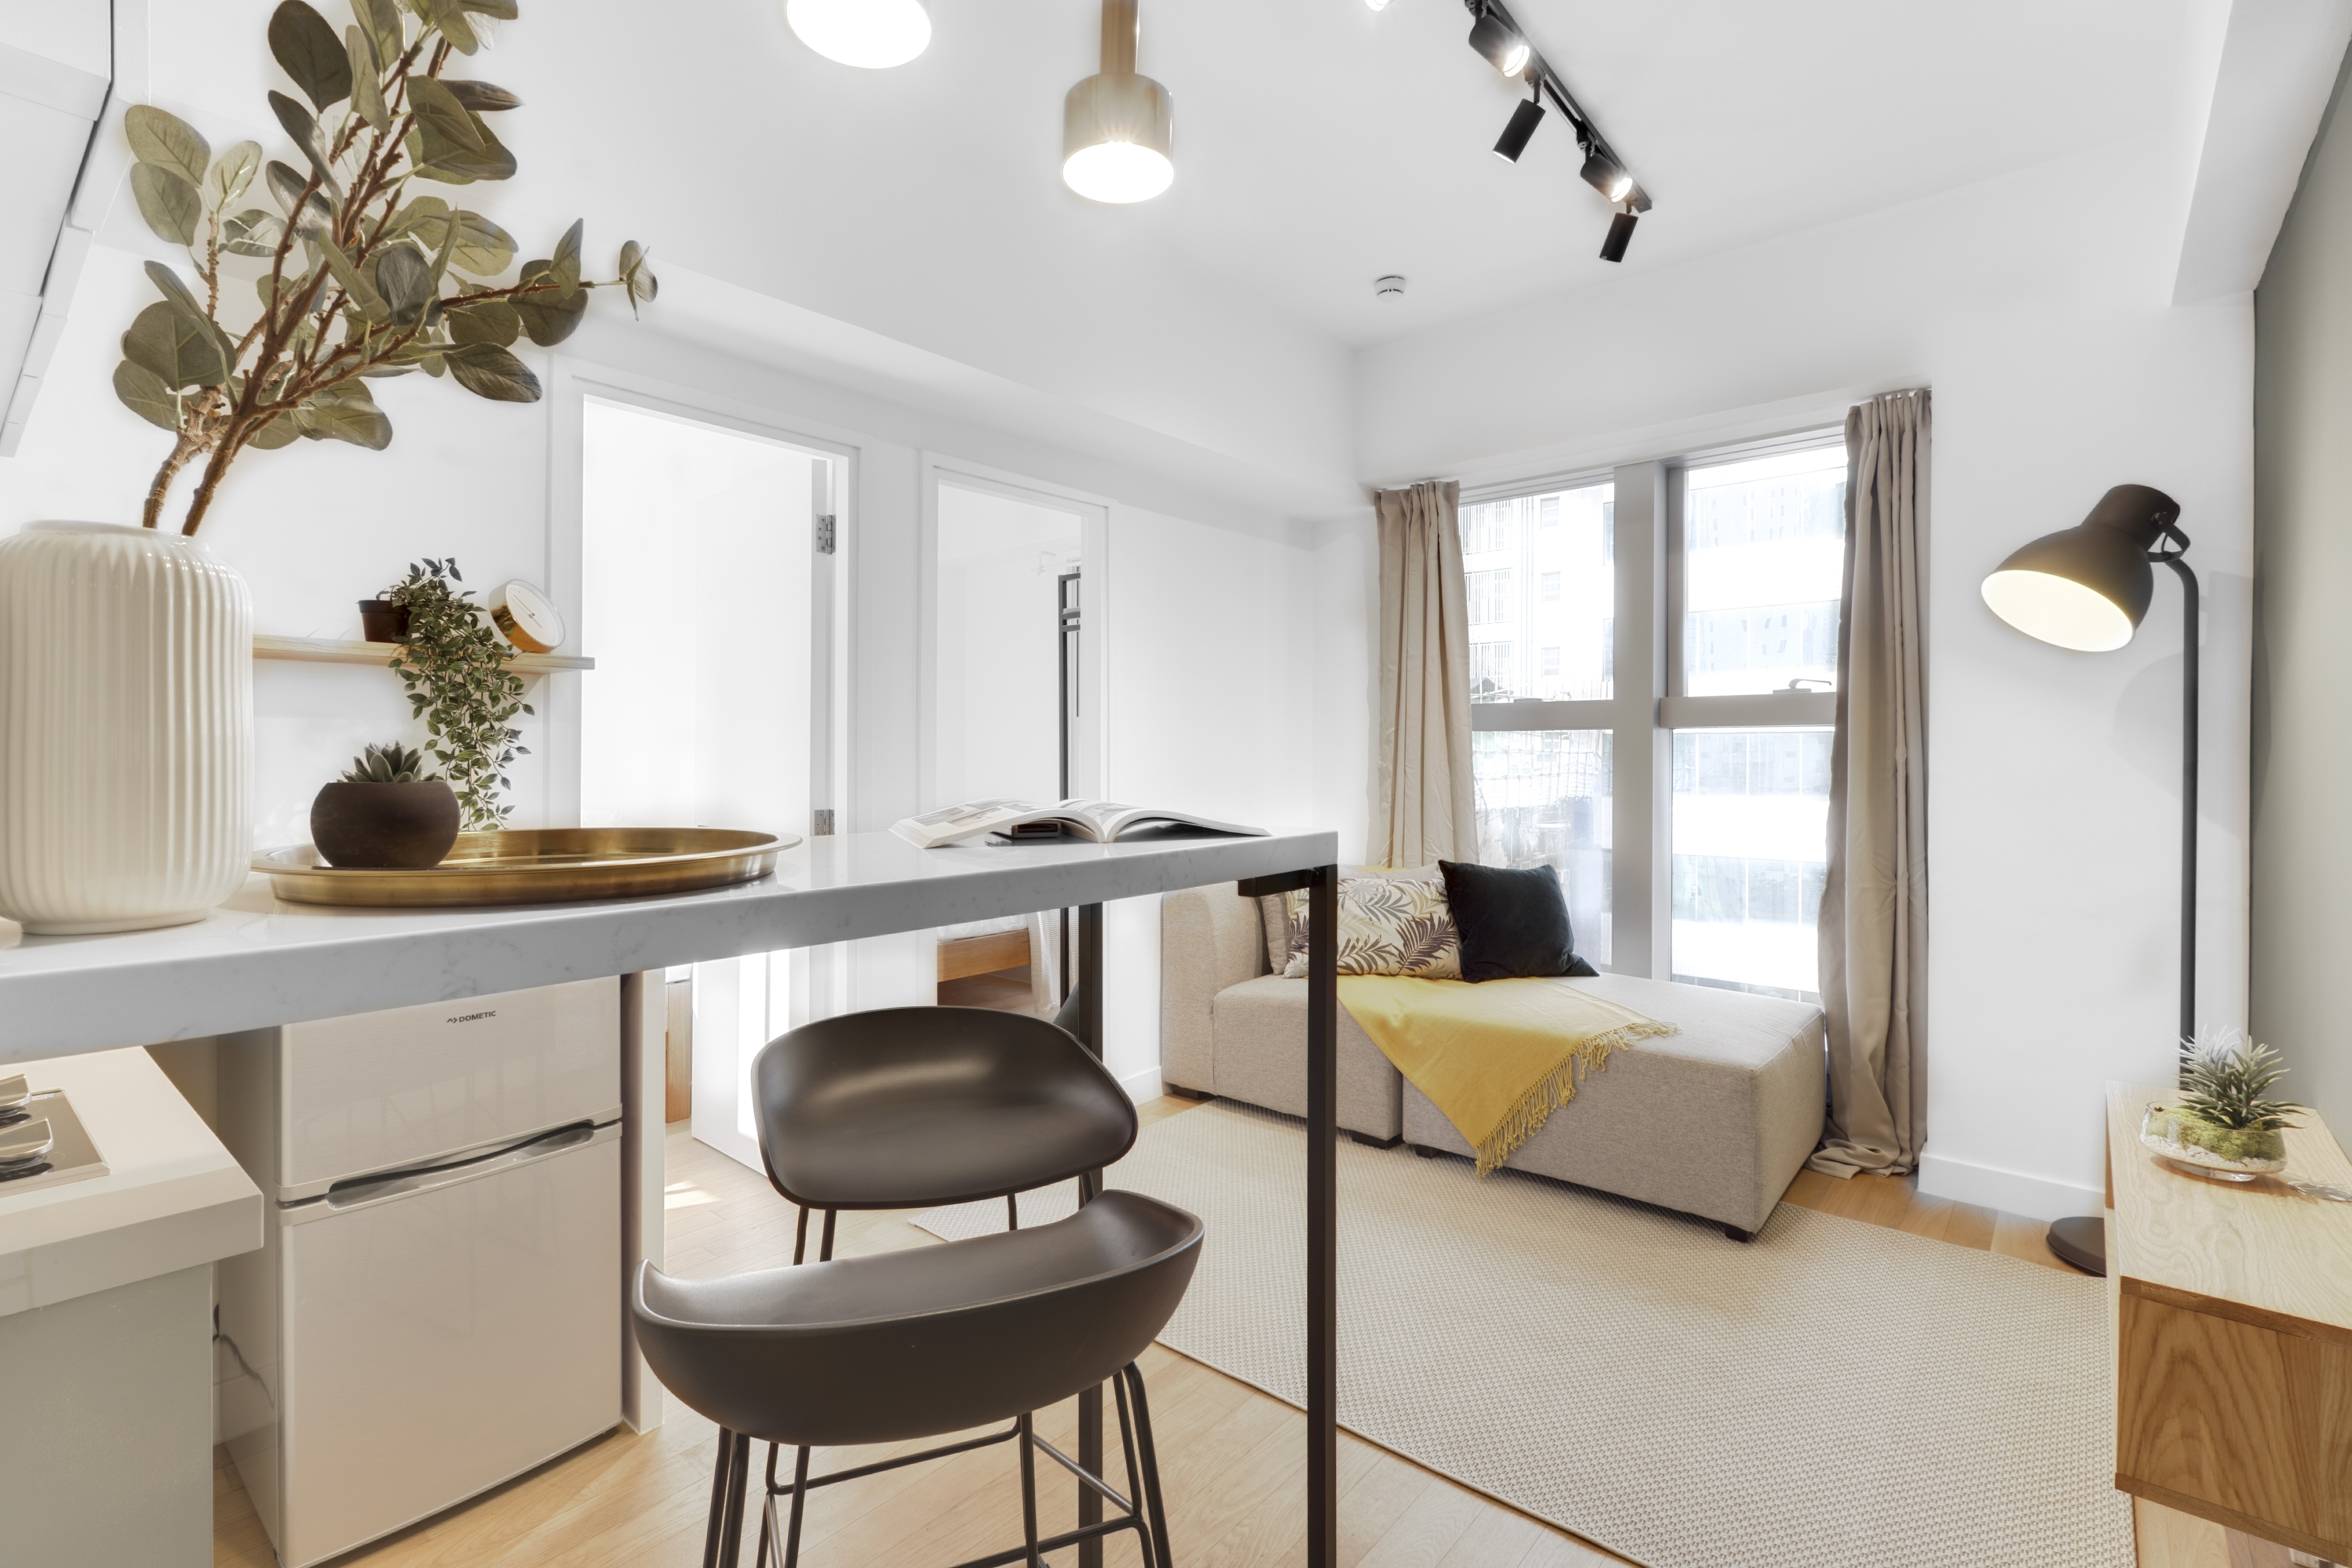 Hmlet, operator of the co-living space pictured here, aims to have 1,000 units by the end of 2020. Photo: Handout